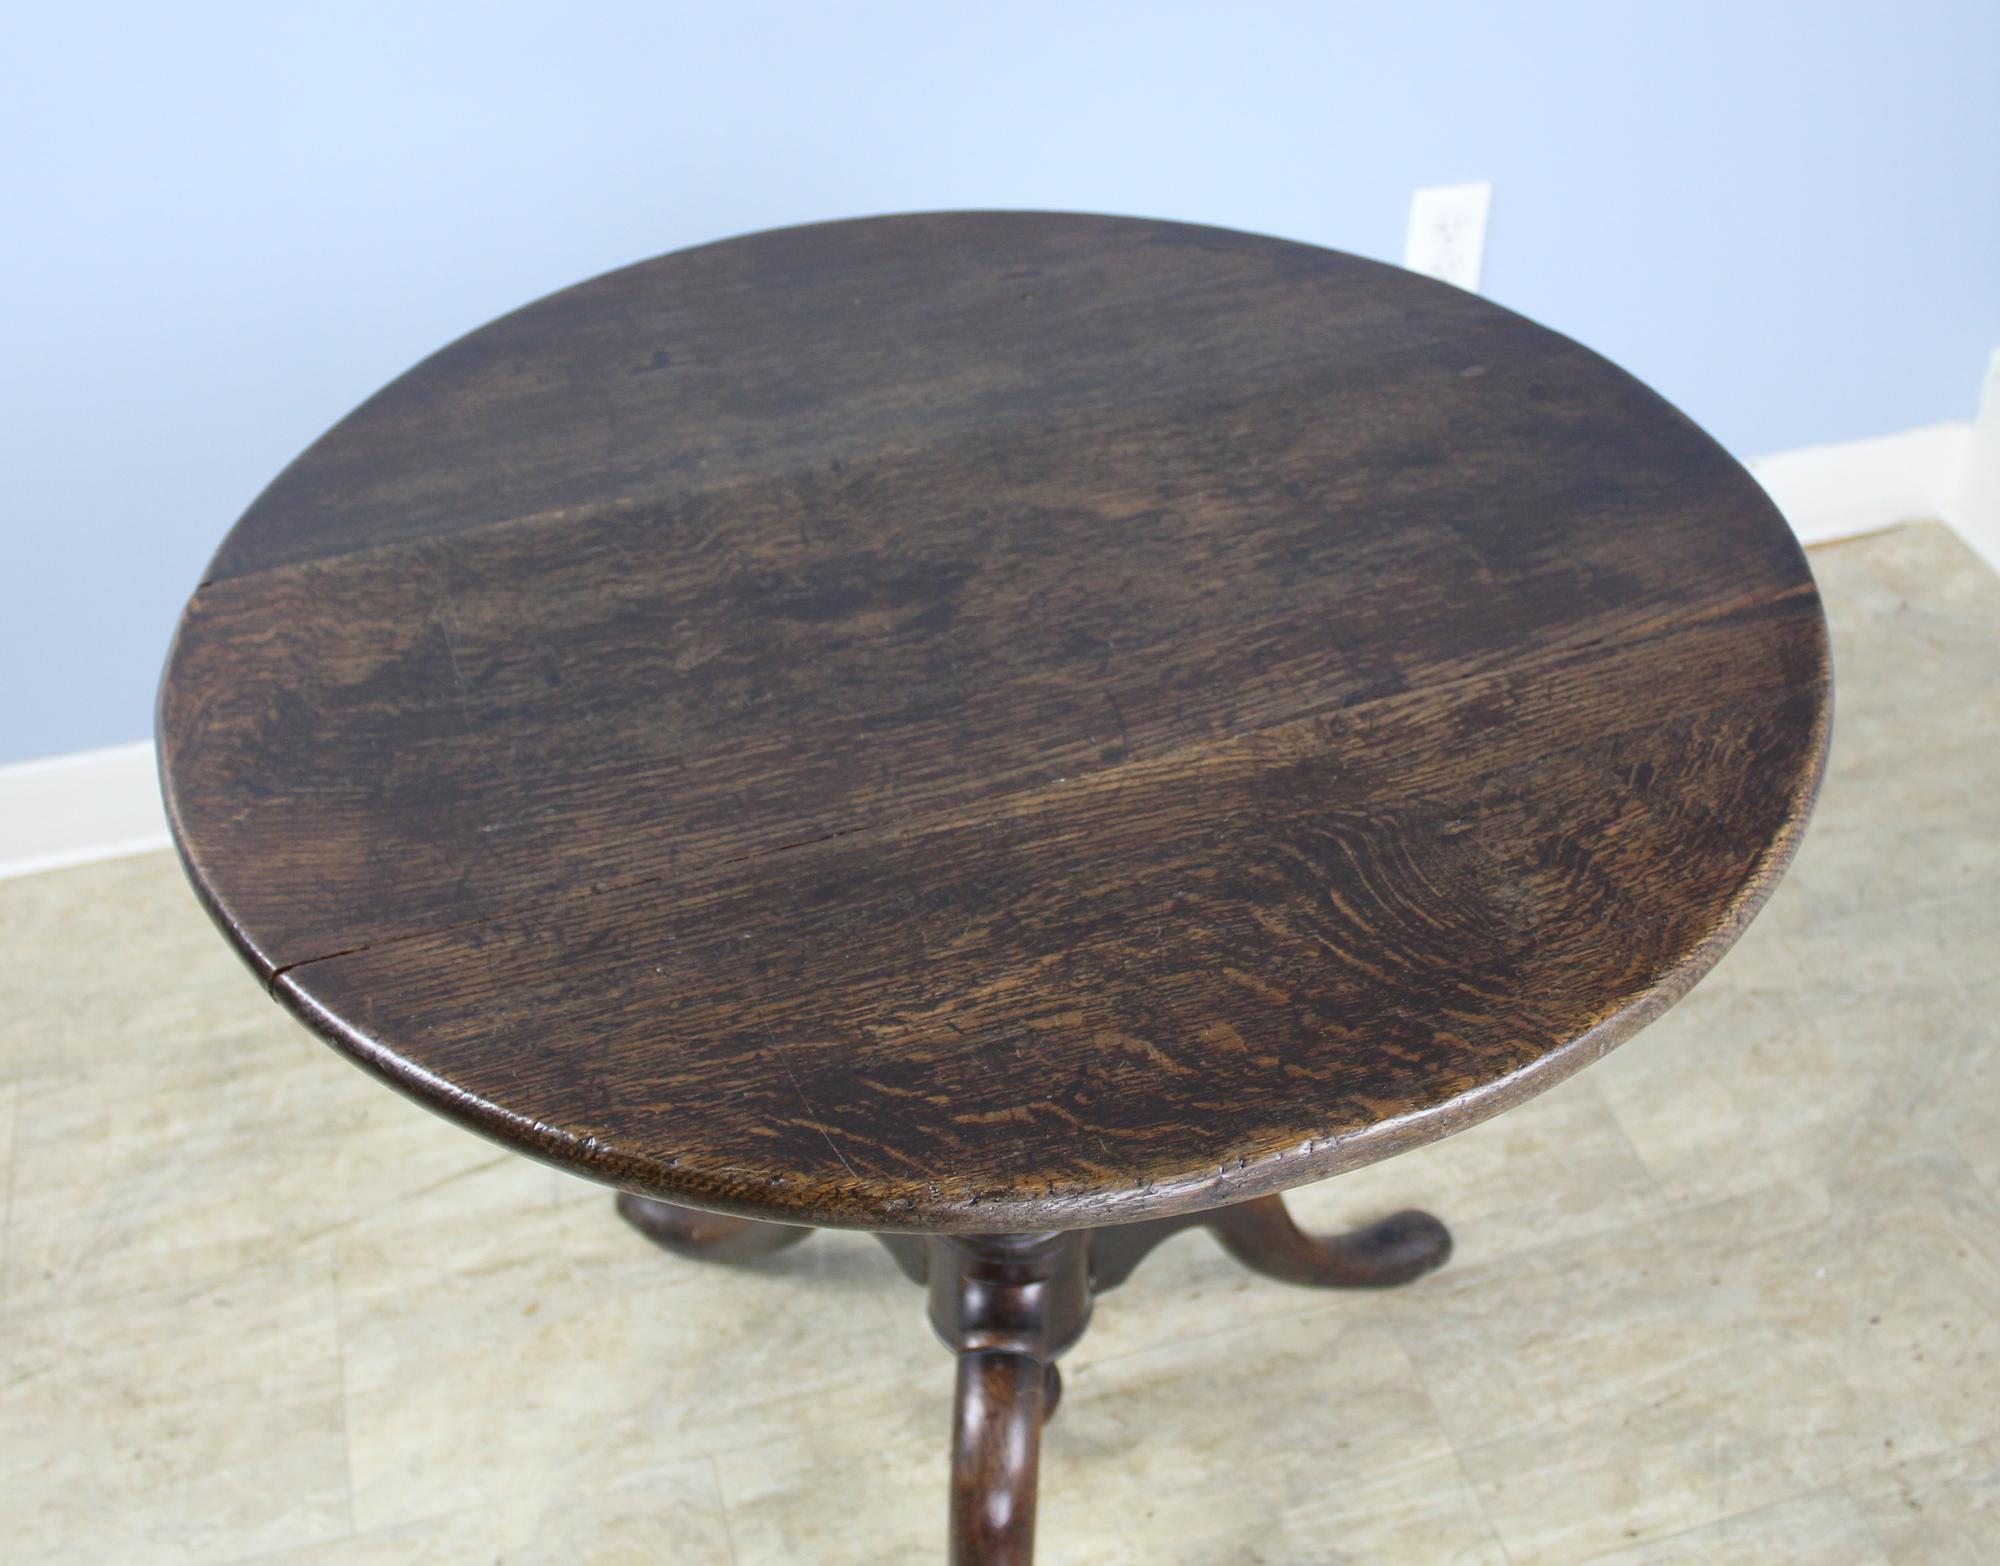 Early Georgian Period Oak Tripod Based Lamp Table In Good Condition For Sale In Port Chester, NY